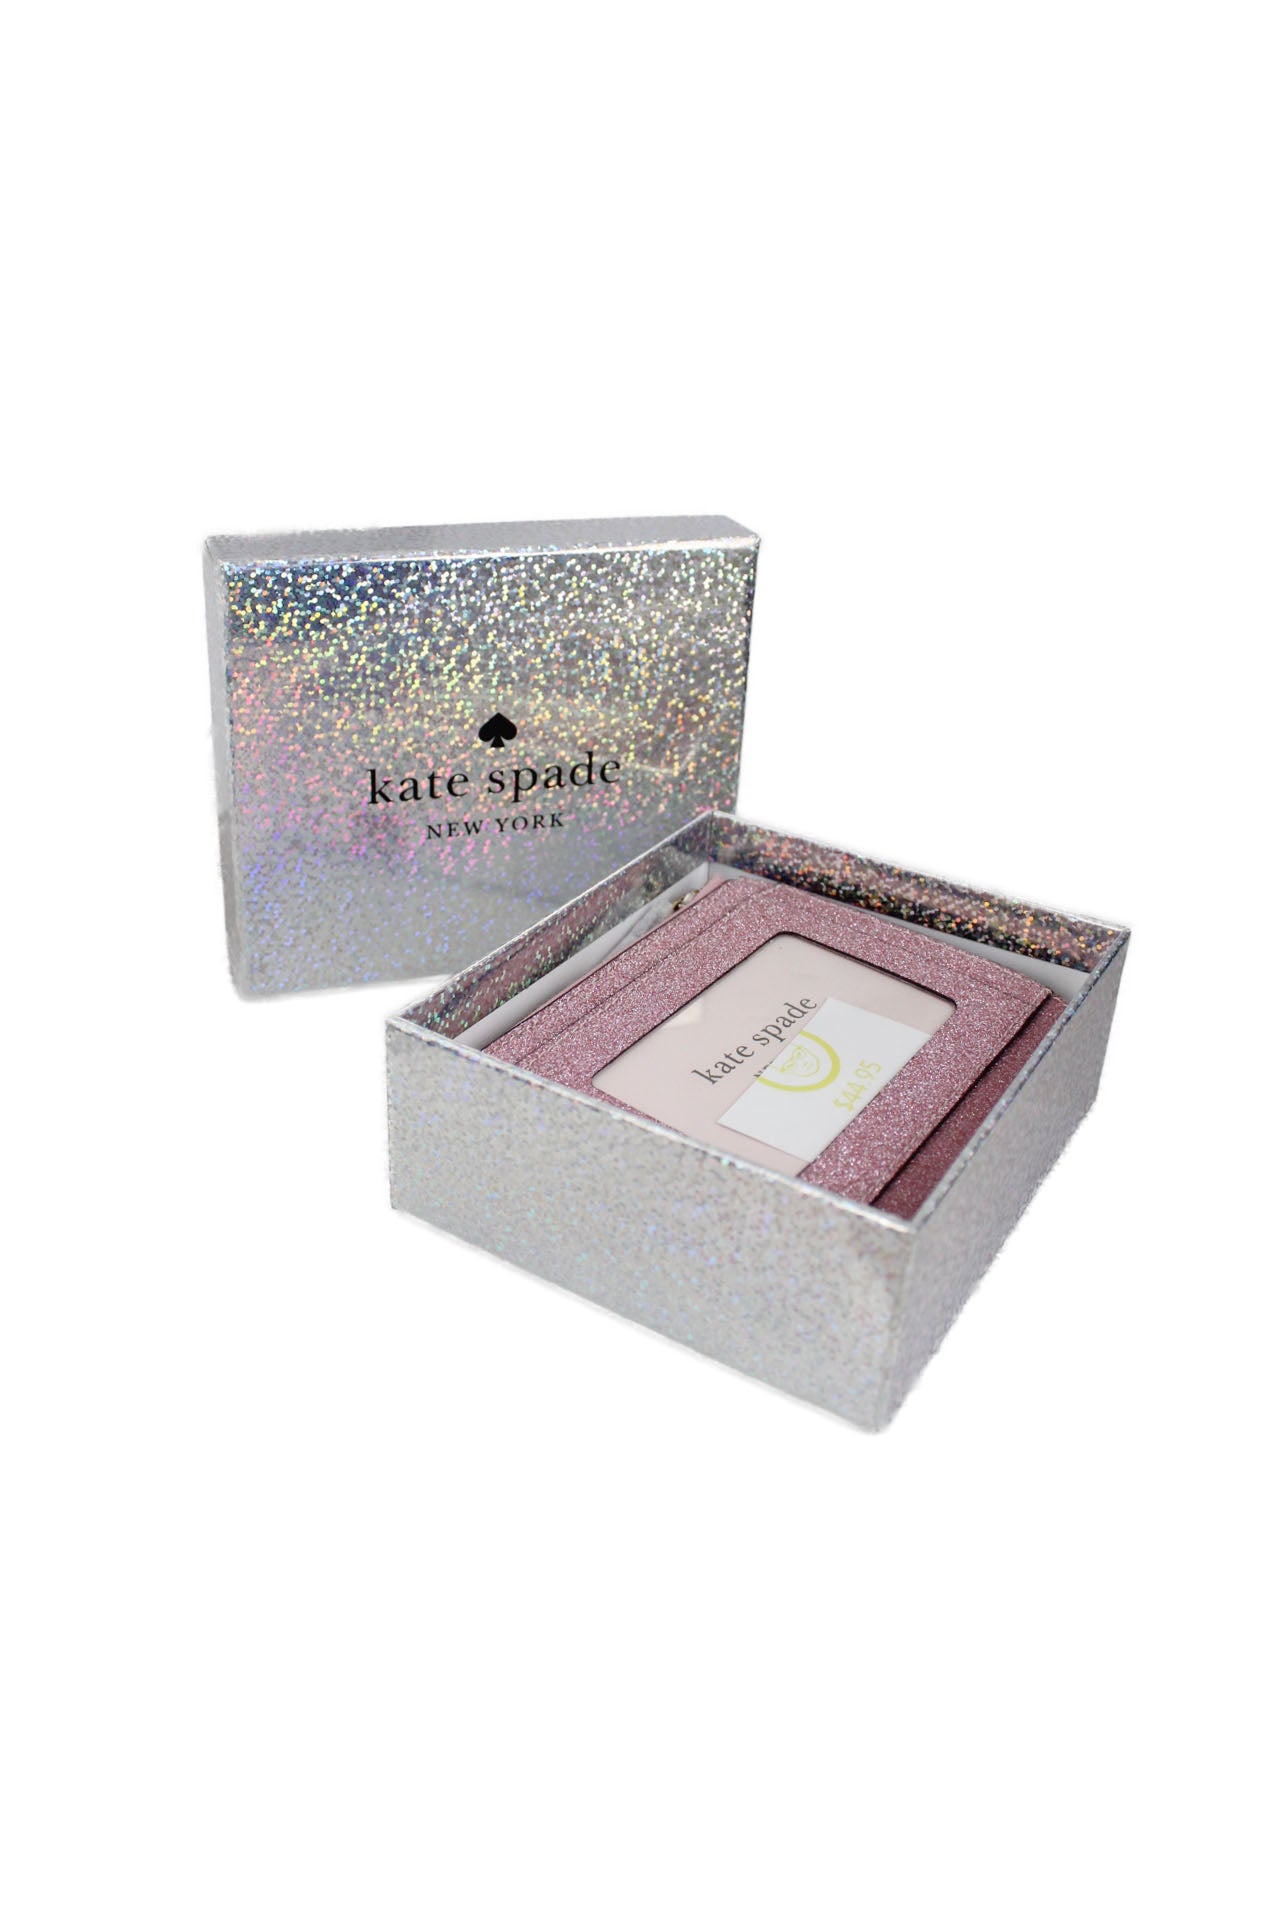 box view of kate spade pink ‘lola glitter’ small l-zip bifold wallet. features branding & l-zip compartment, interior 6-card slots, back clear window id compartment, metal pinmount with spade logo,  magnetic snap closure, bill fold, zip around coin compartment